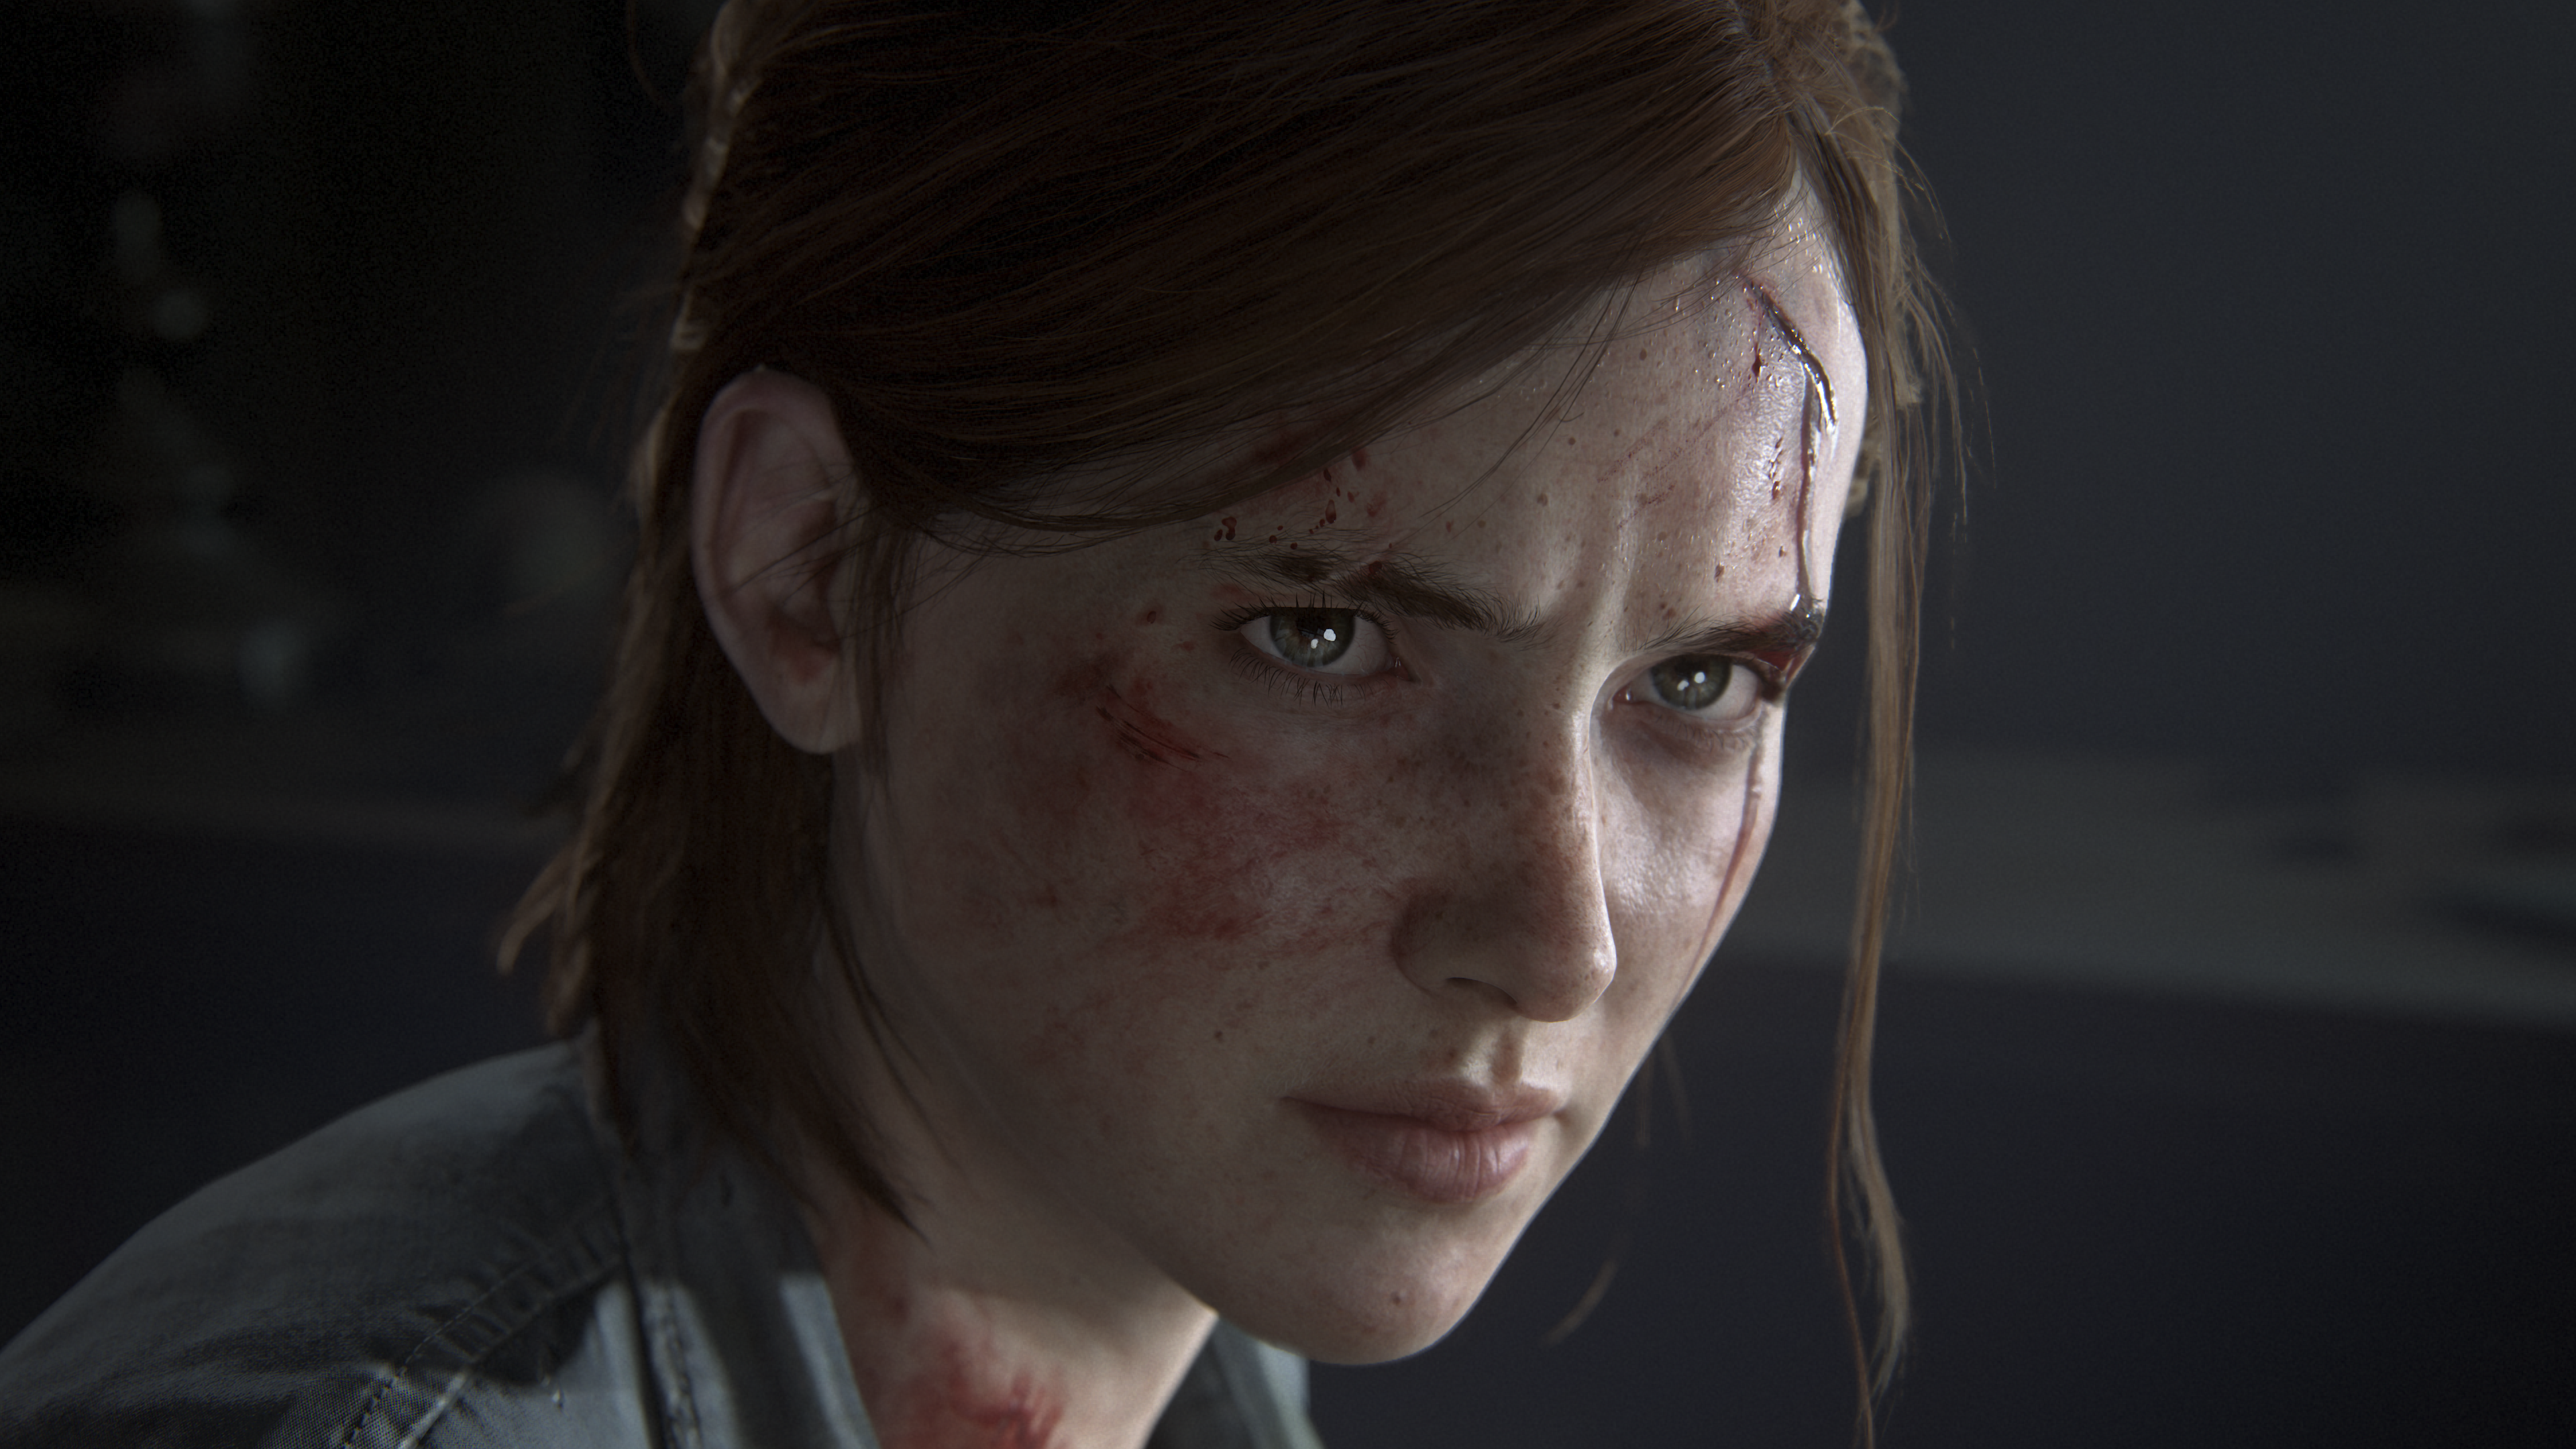 What you should know about The Last of Us Part II, a post-apocalyptic  PlayStation 4 game